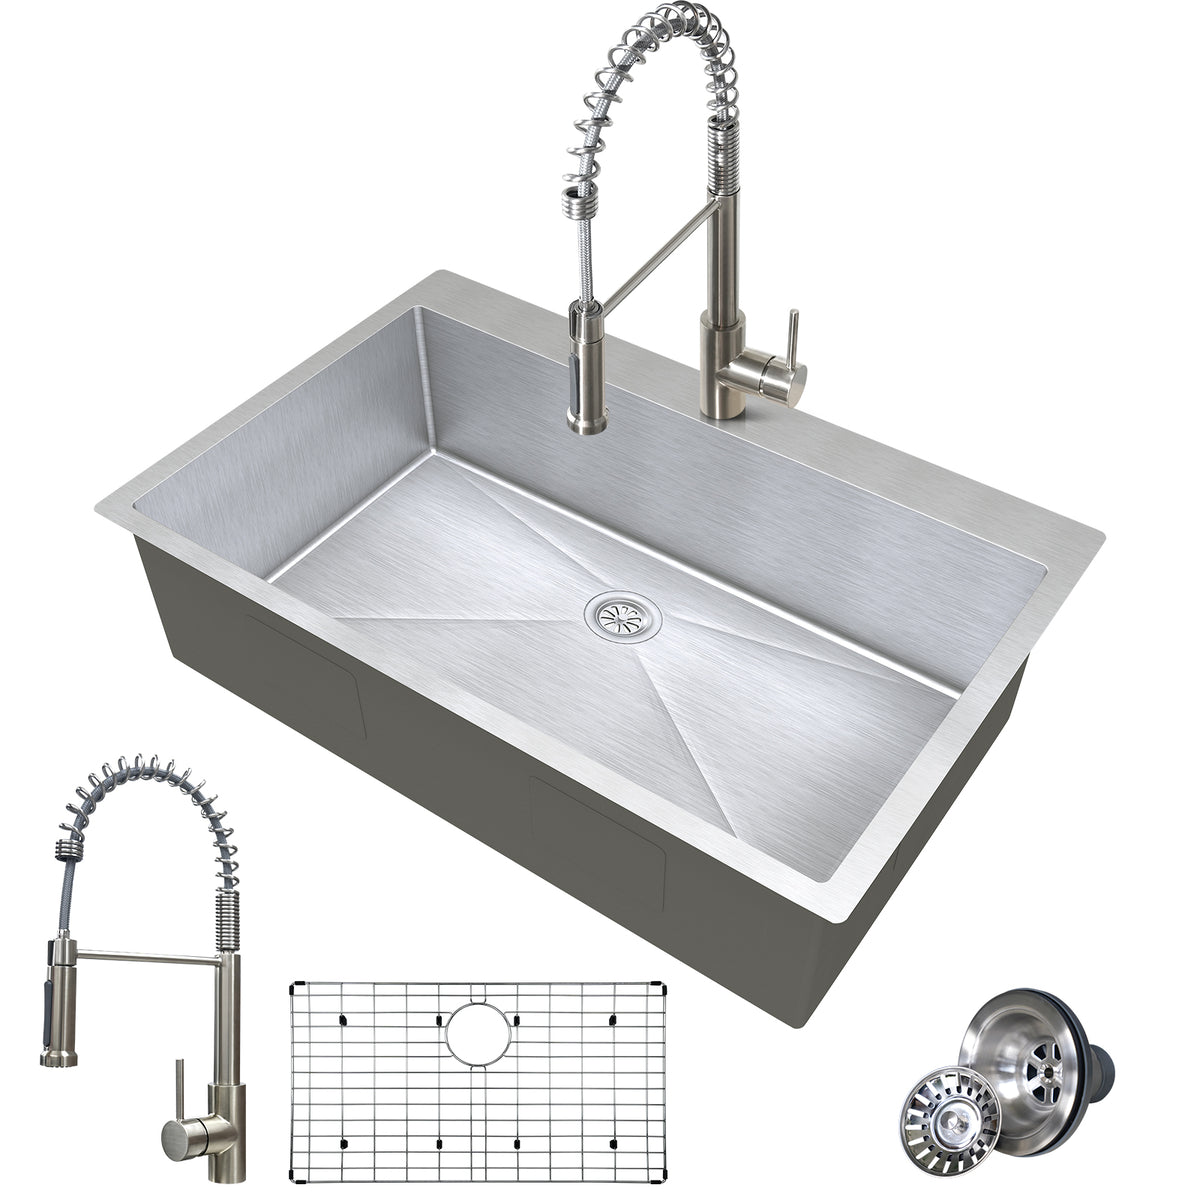 TECASA 33" Dual Mount Kitchen Sink with Pull-Down Faucet Combo